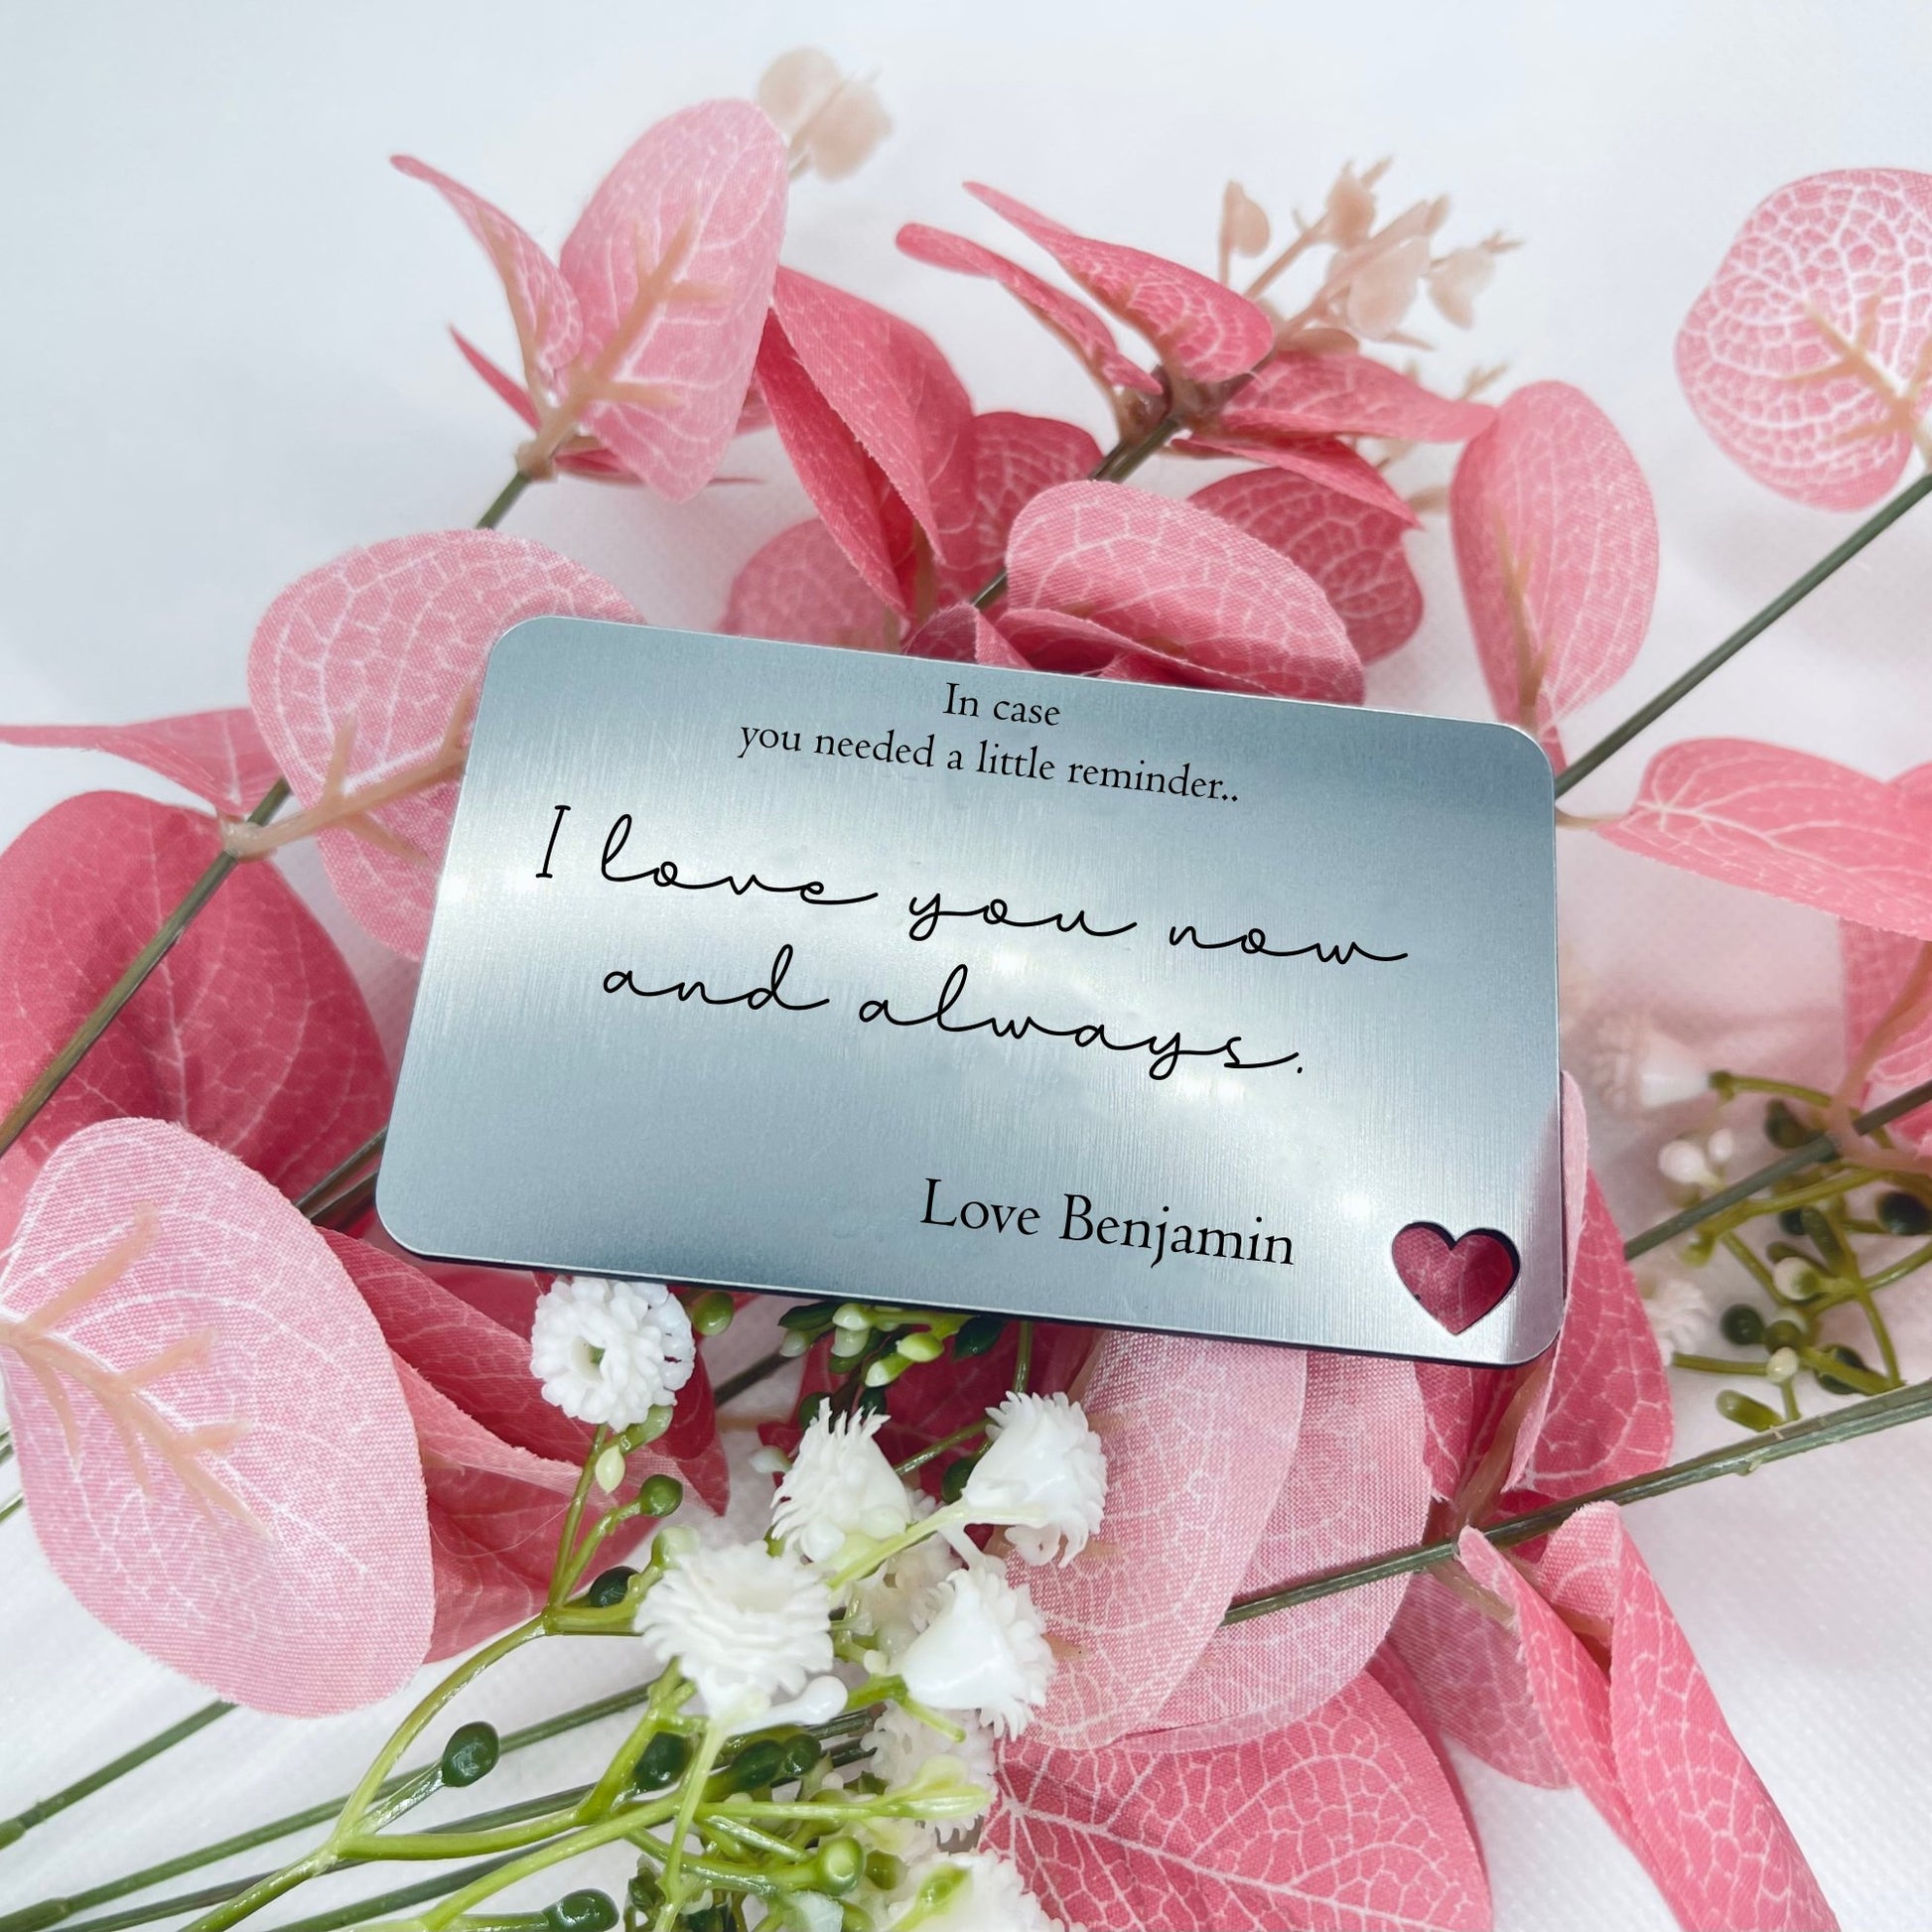 Love Reminder Keepsake: Personalised Wallet Insert with a heartfelt message, "I love you now and always." Ideal for him on Valentine’s Day, birthdays, or any special occasion.